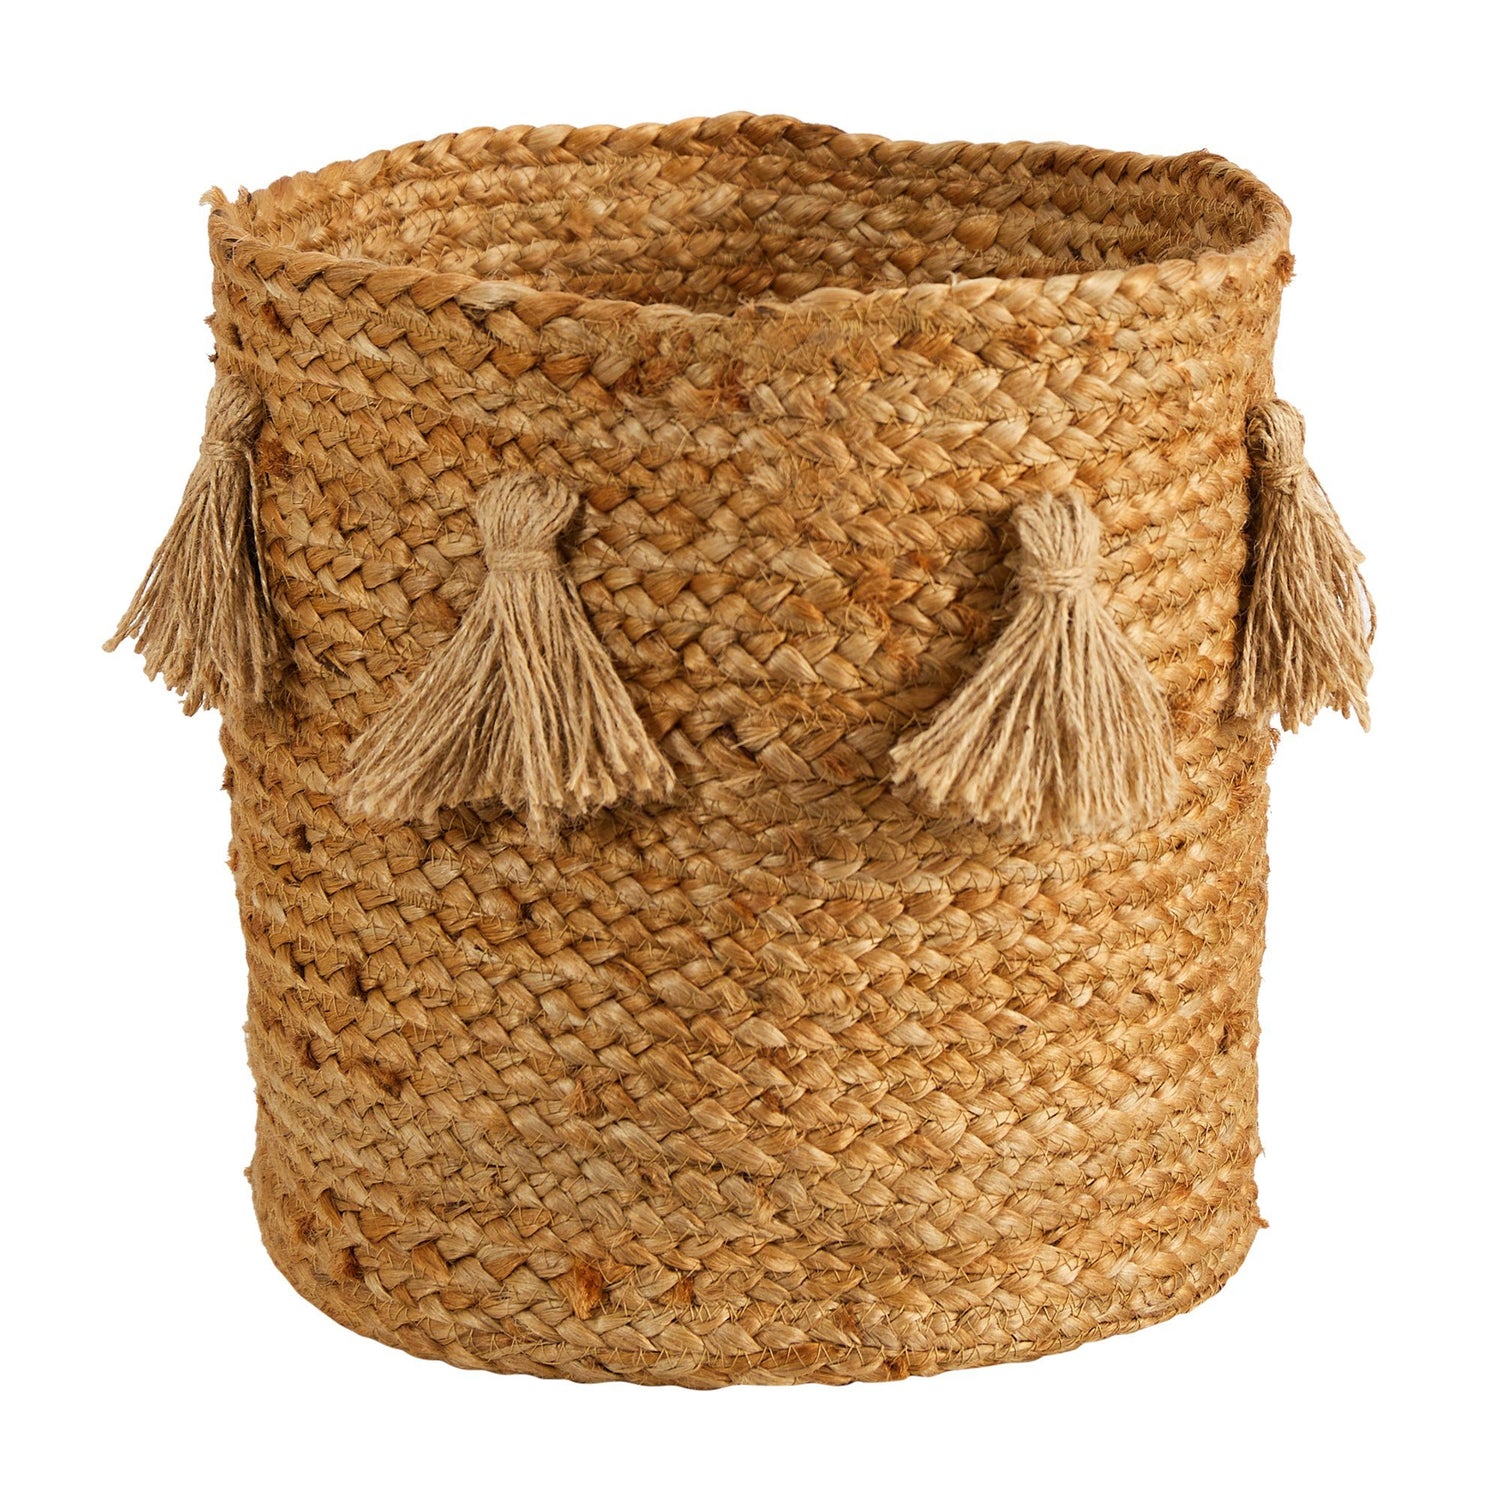 12.5” Boho Chic Natural Hand-Woven Jute Basket with Tassels